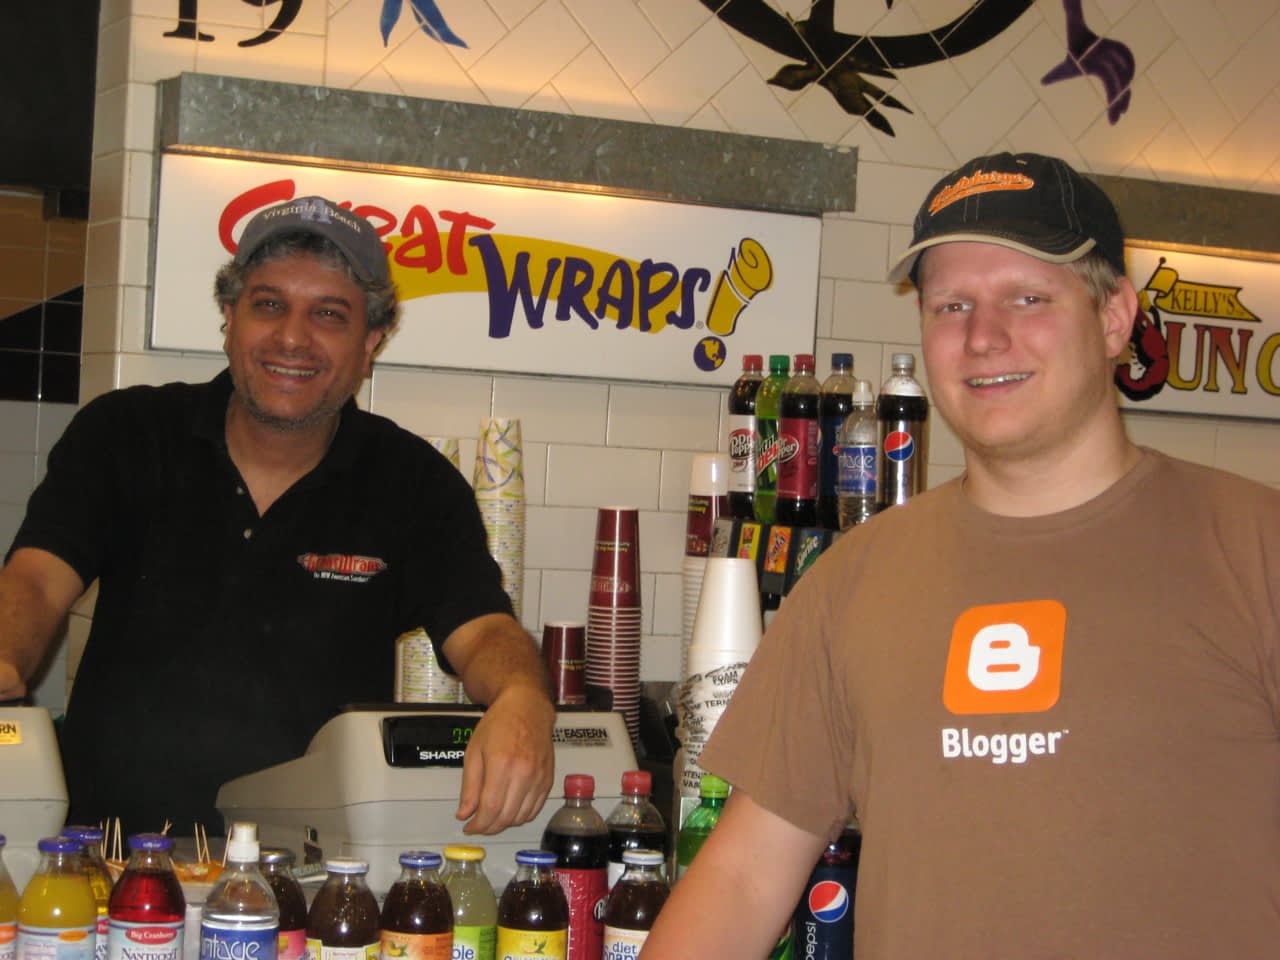 Pat with the manager of Great Wraps